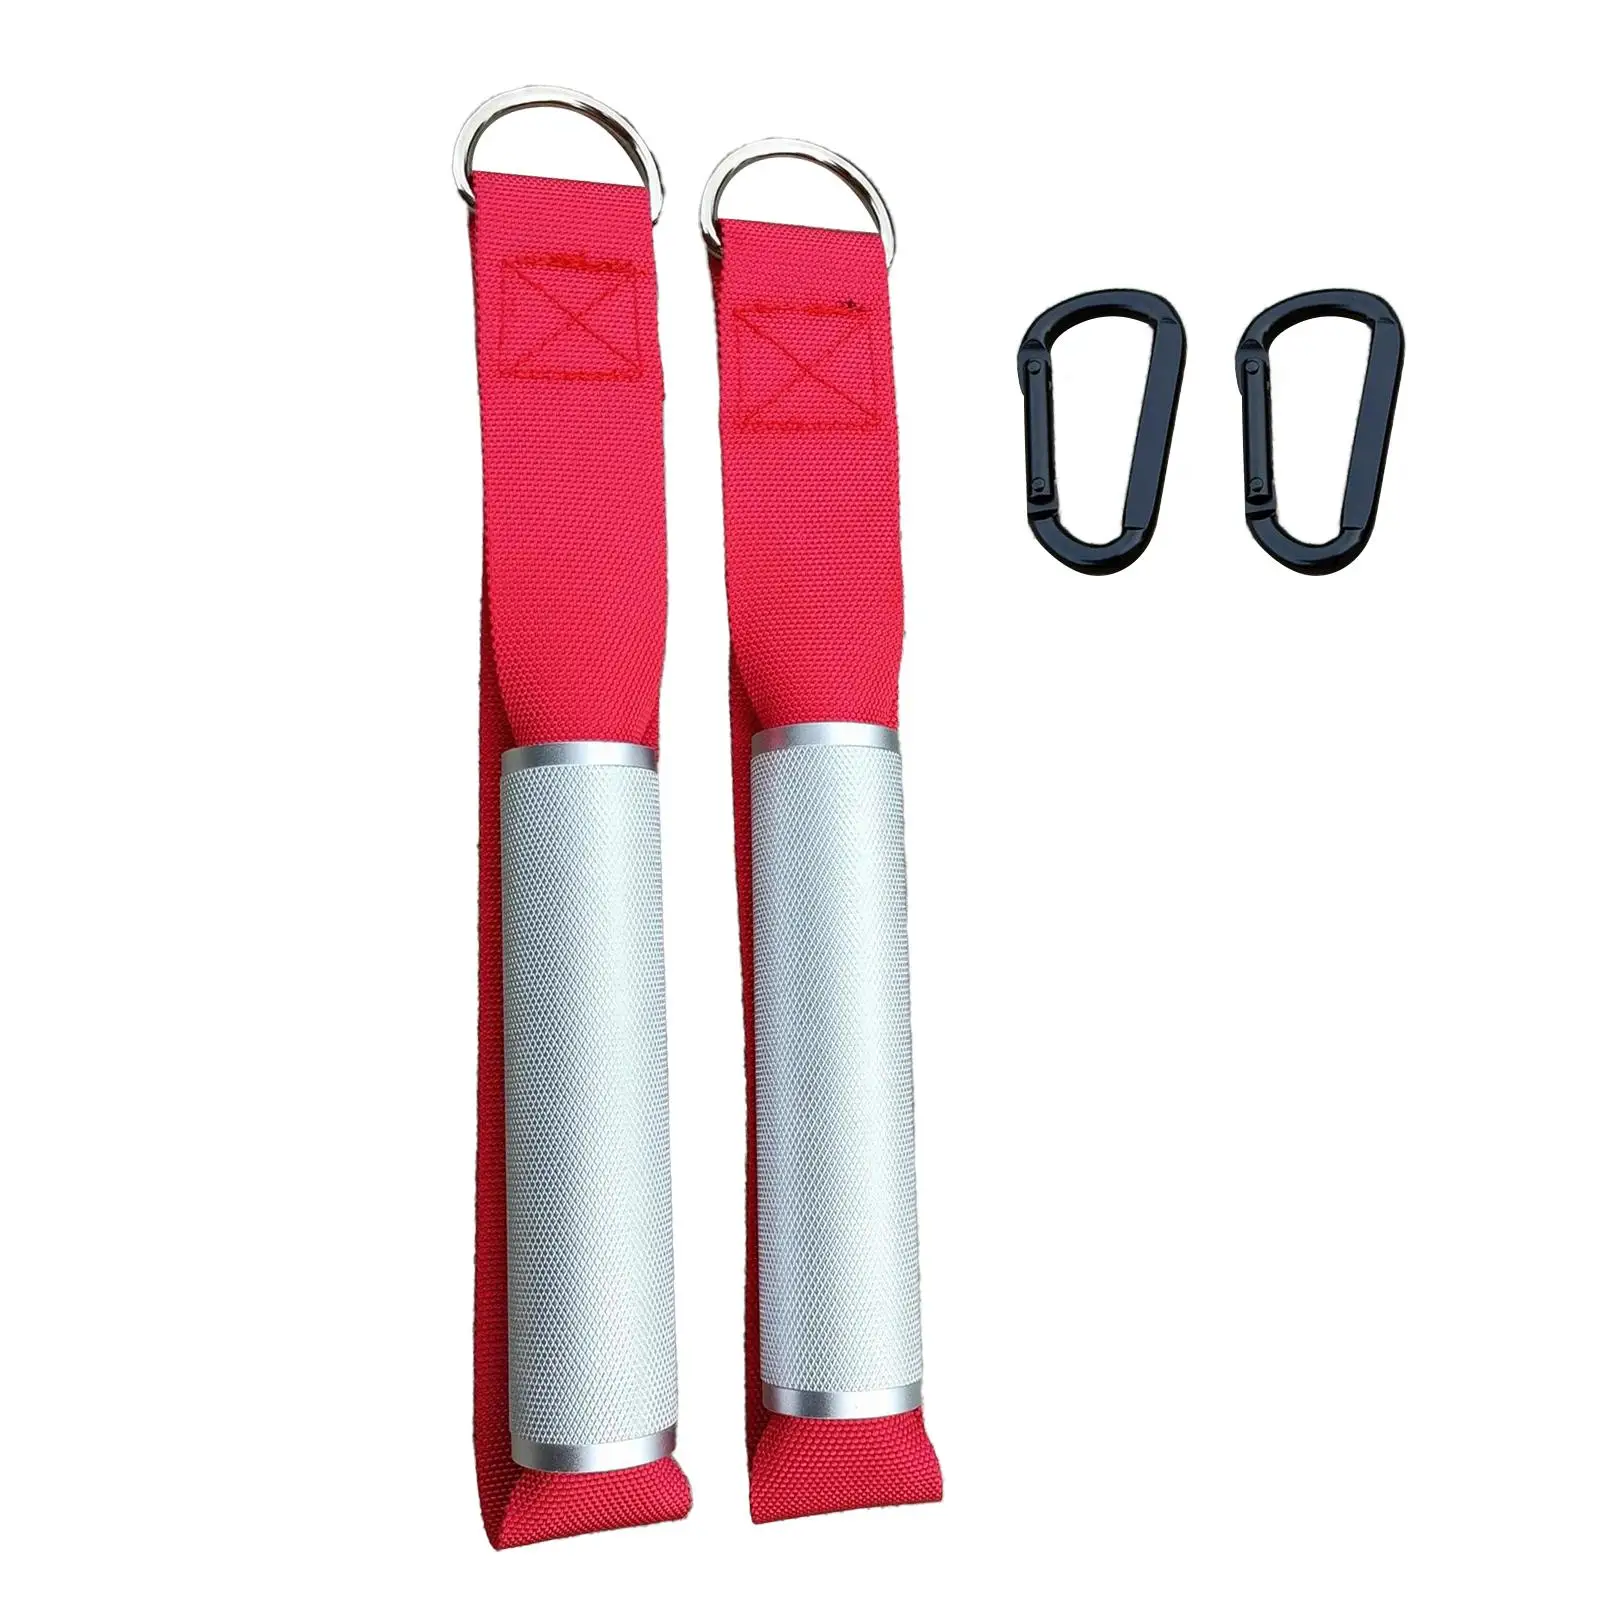 2 Pieces Gym Handles Workout Gymnastics Hanging Resistance Exercise Fitment Exercise Equipment for Pilates Strength Trainer Yoga